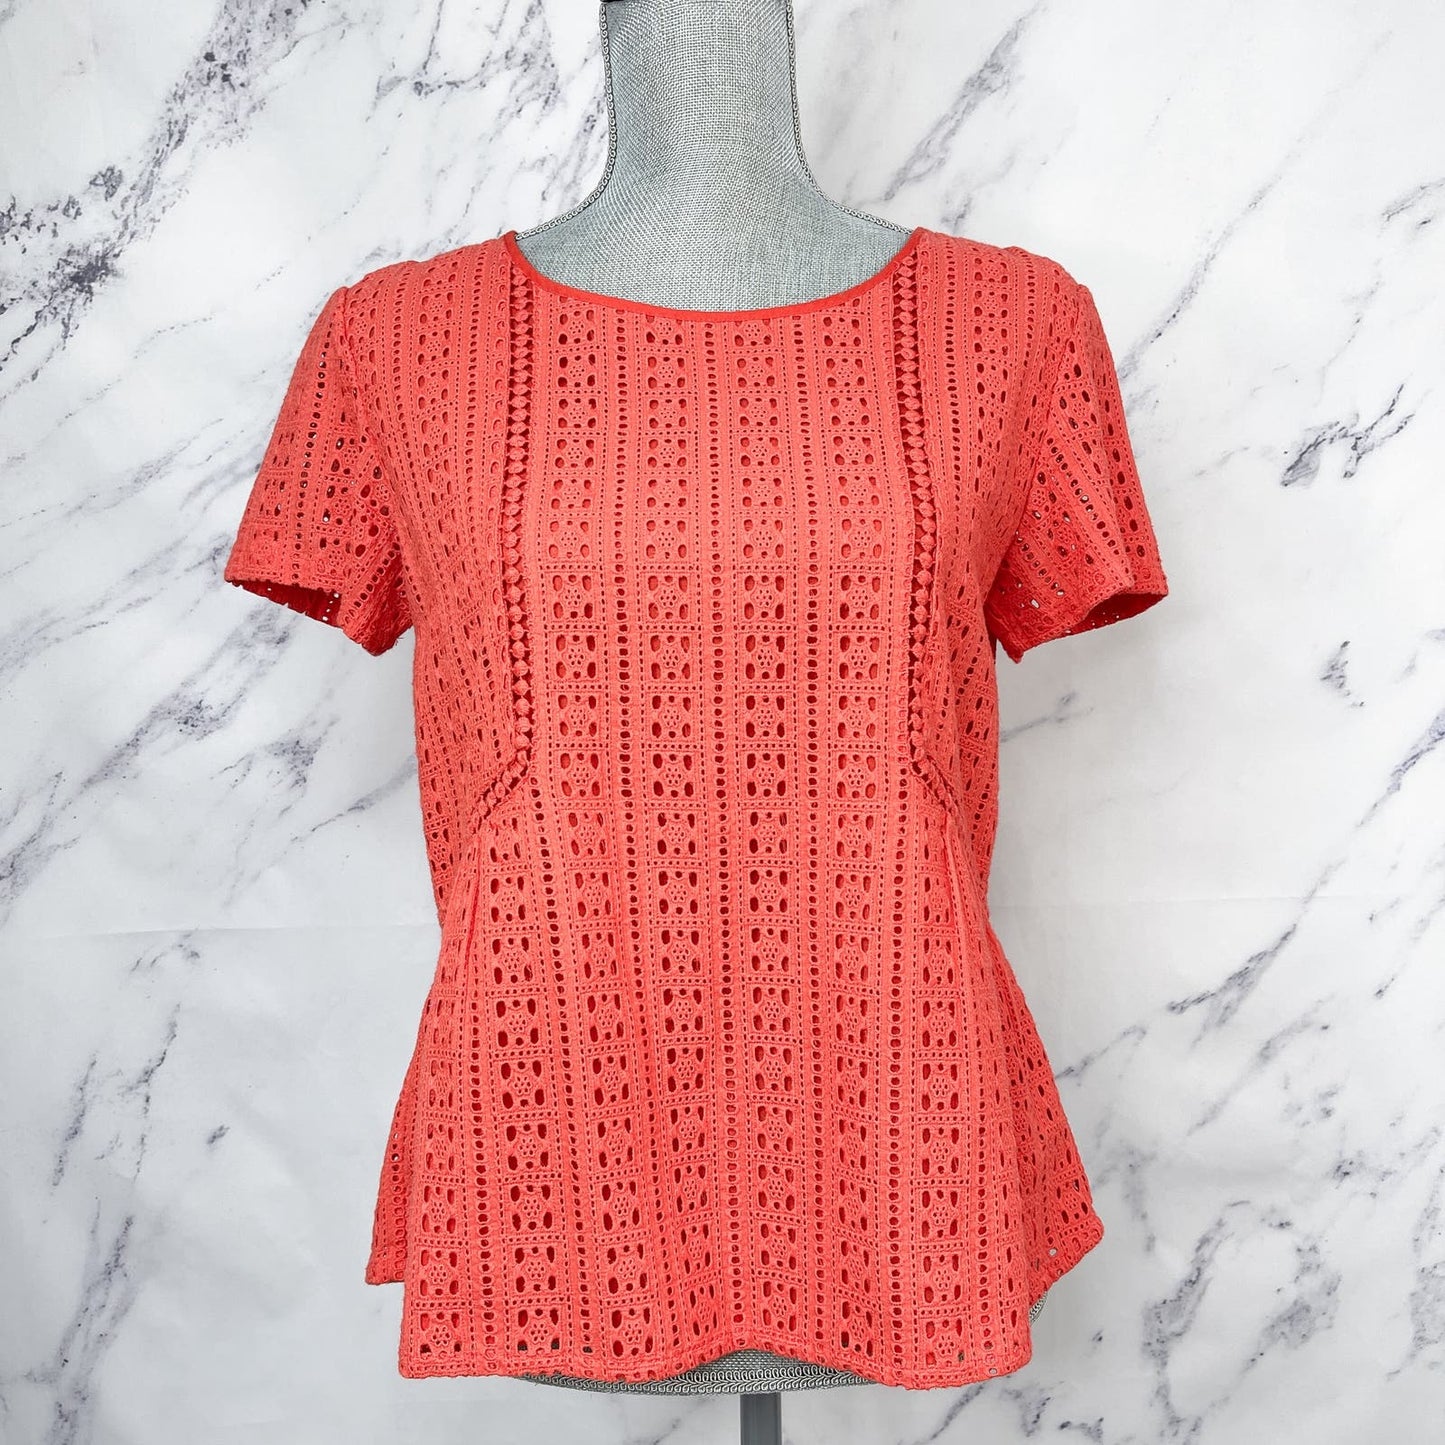 Sezane | Cleo Eyelet Crochet Tie Back Top in Coral Red | 36 (4)